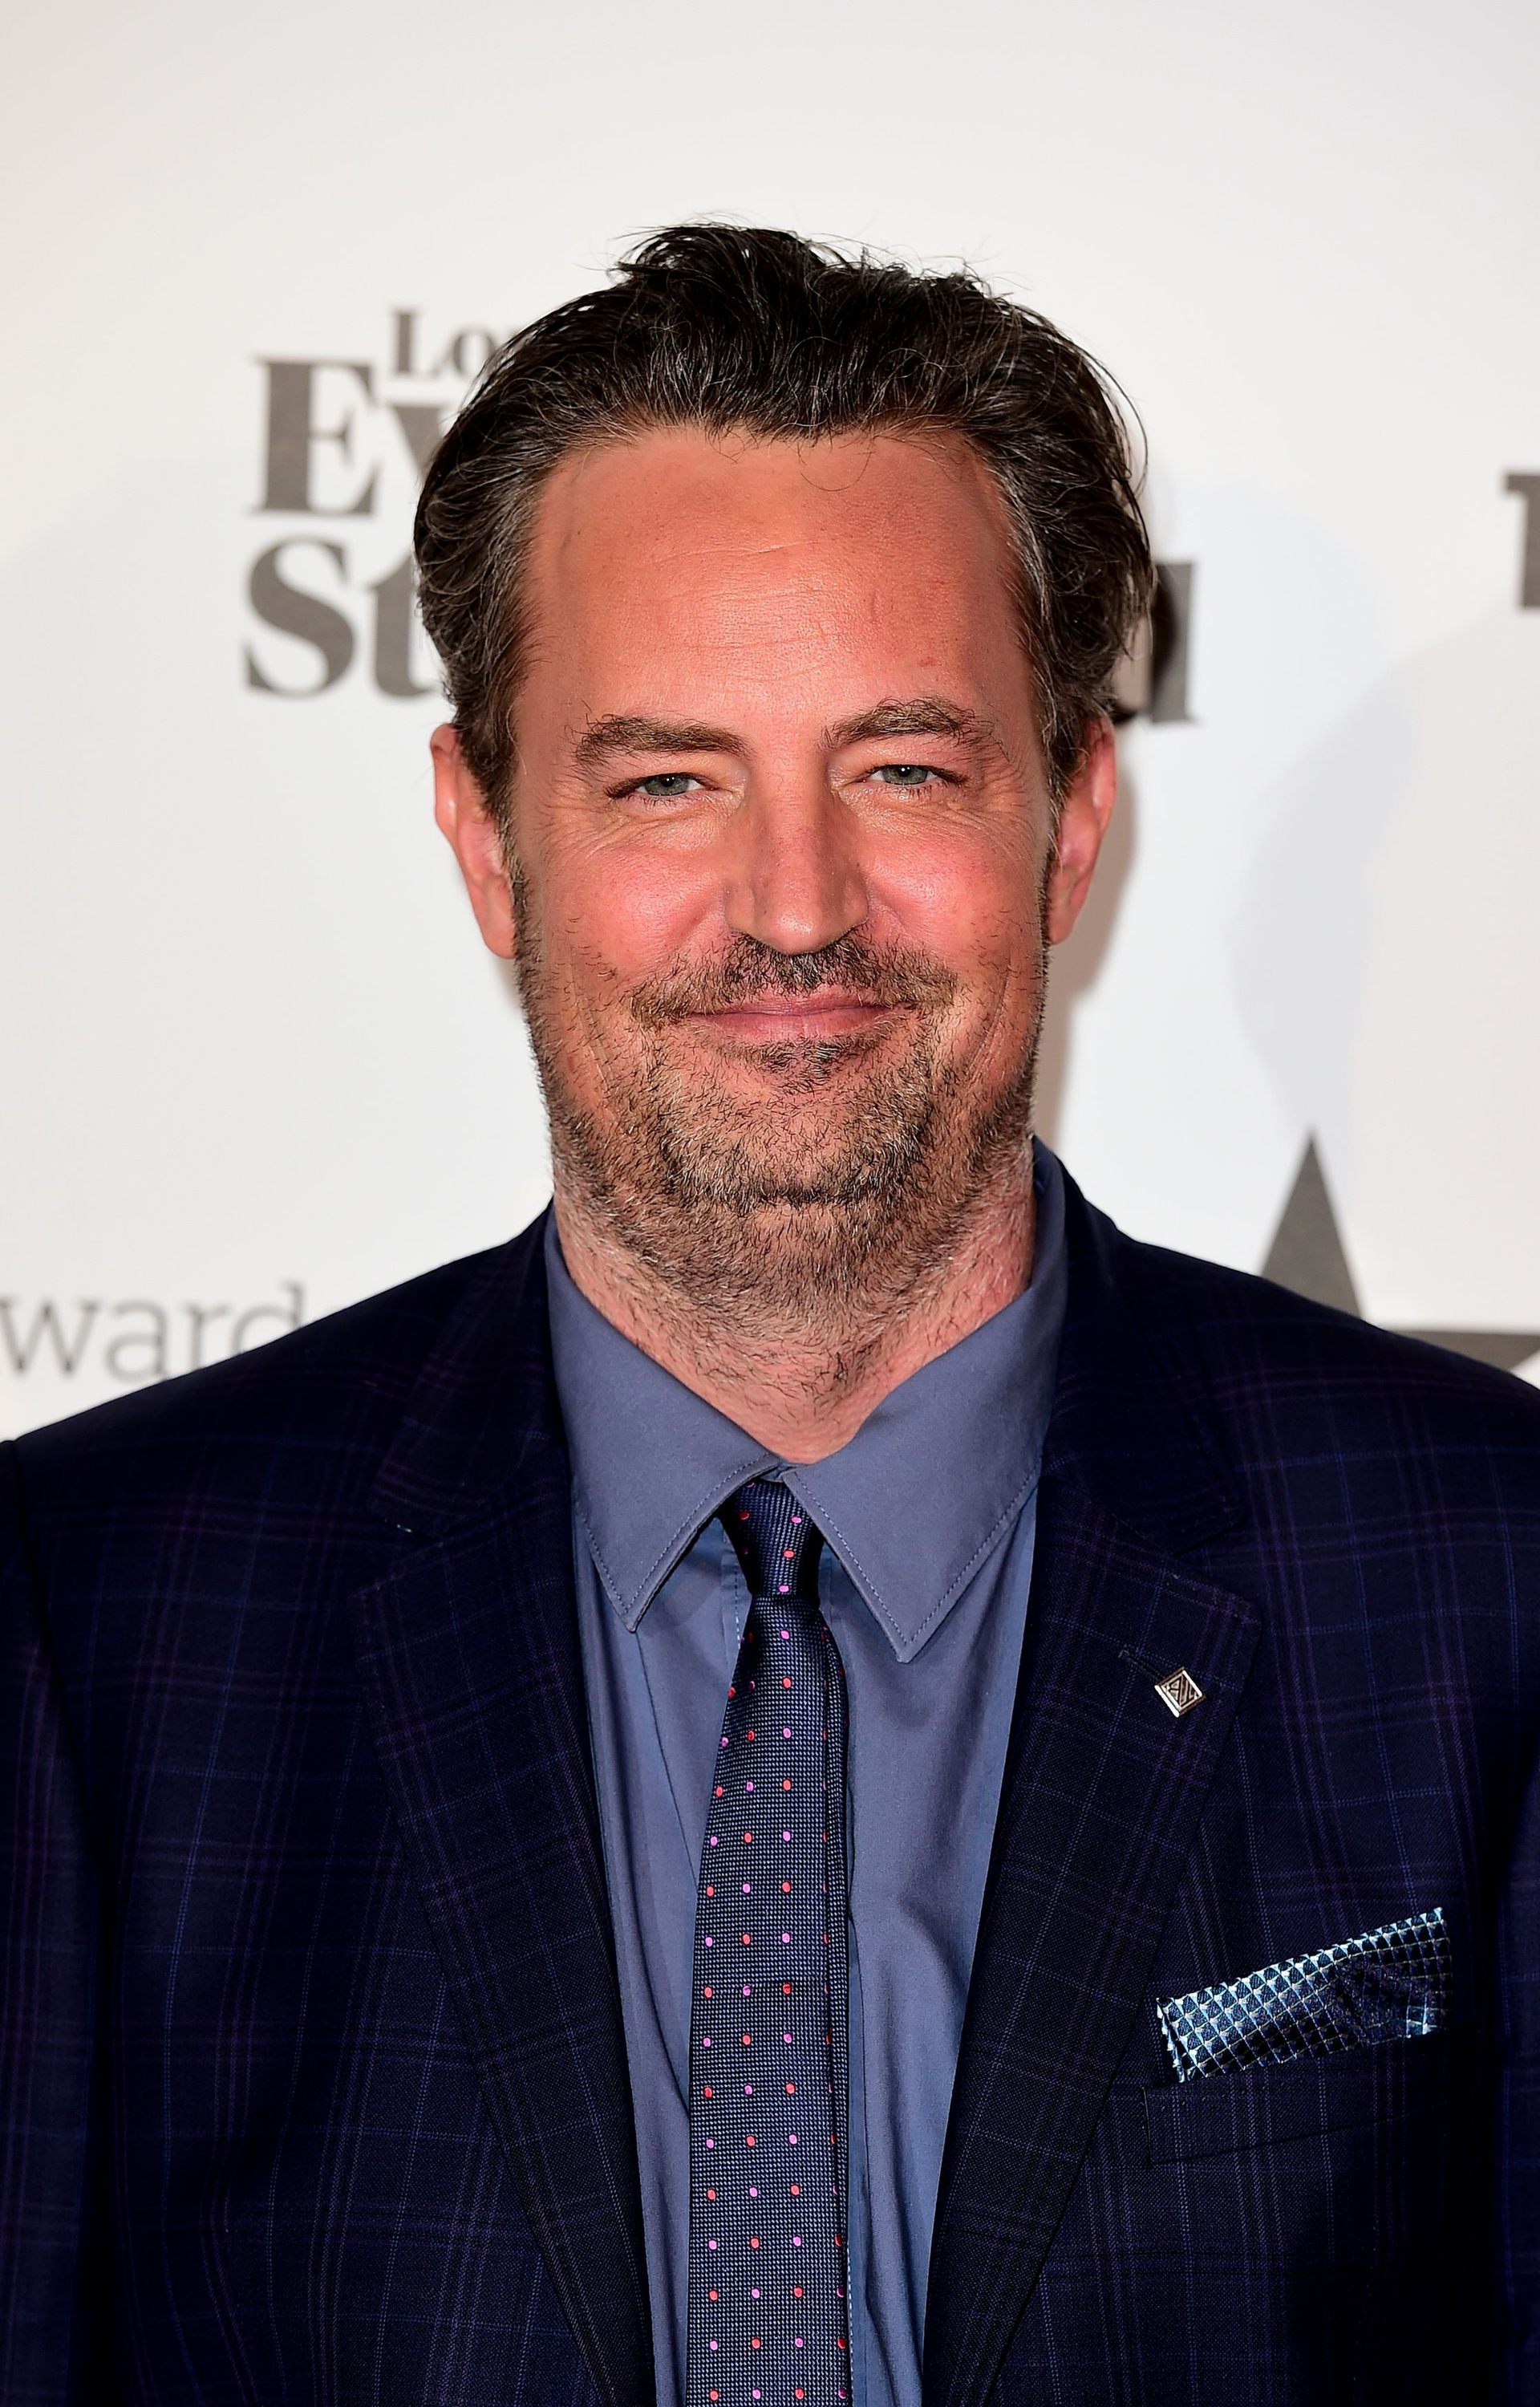 Matthew Perry was known for being ones of the stars of Friends.